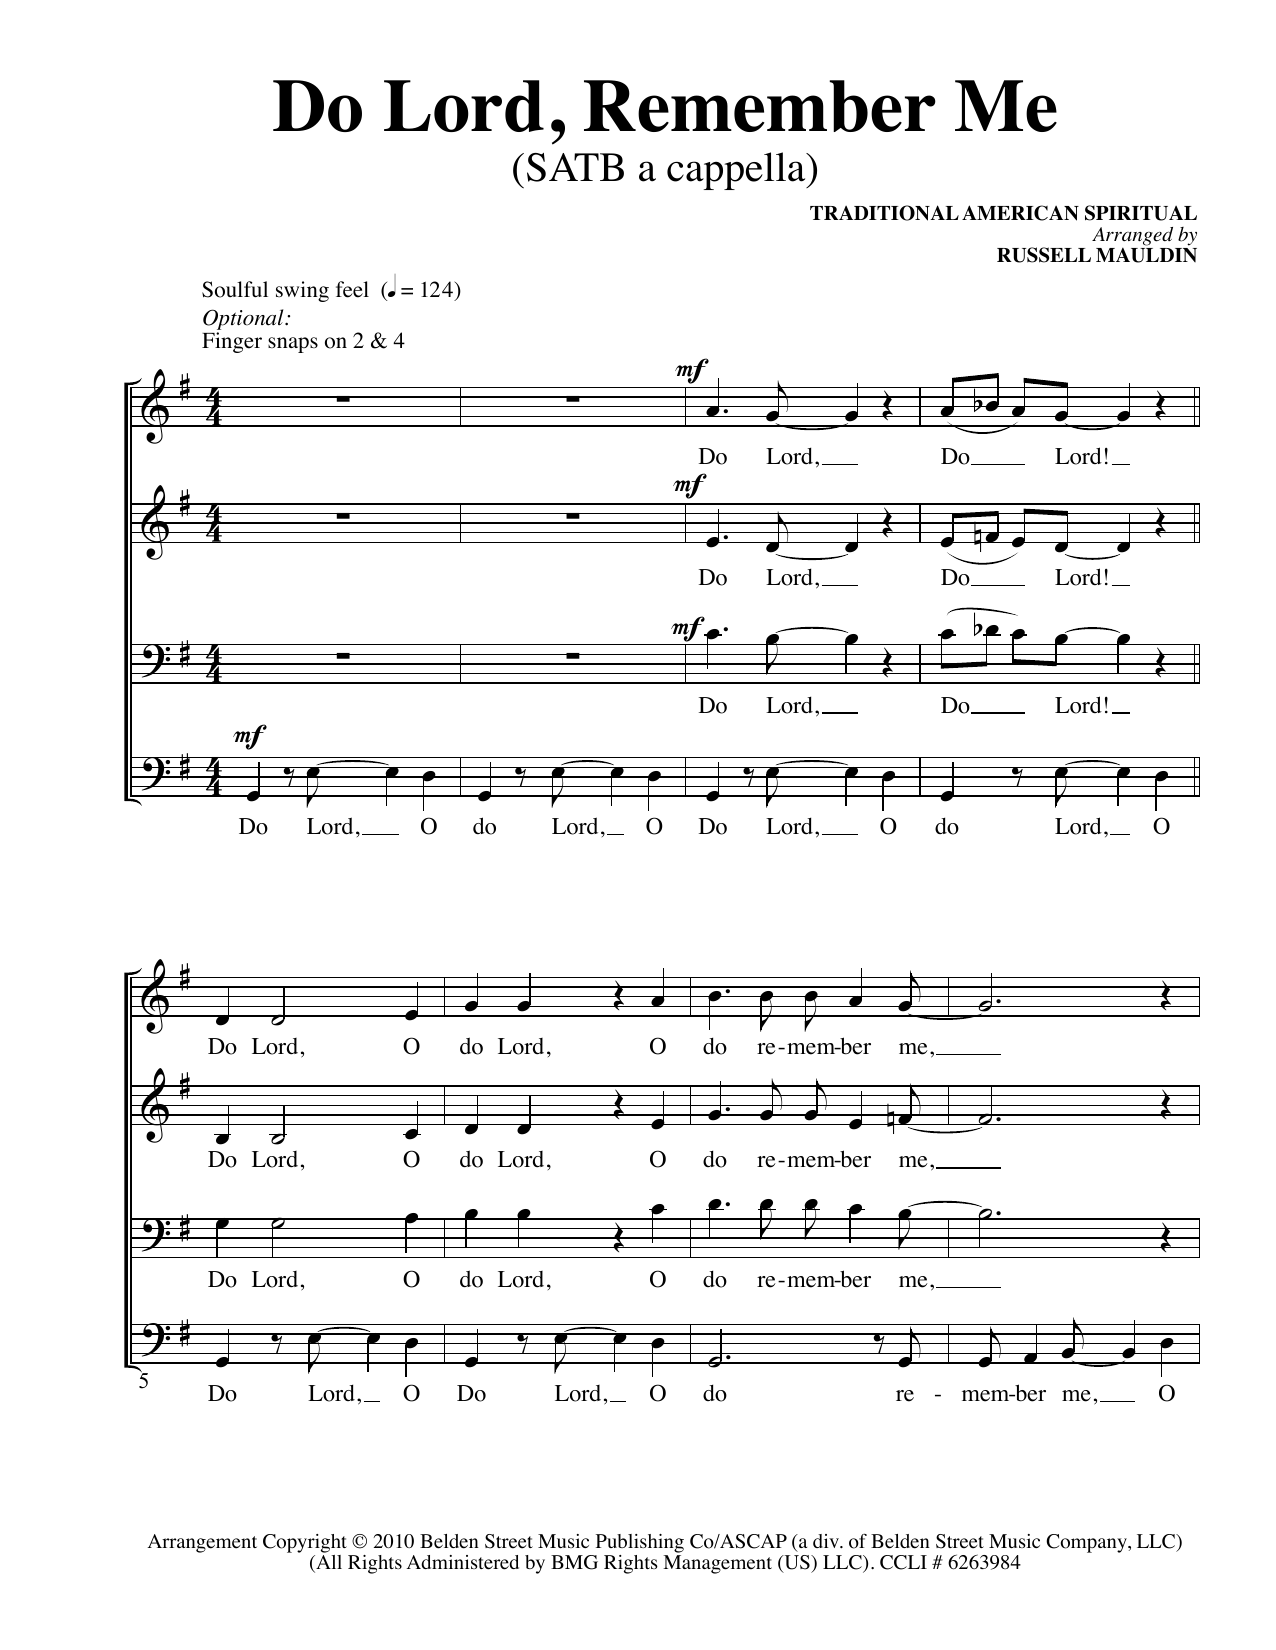 African-American Spiritual Do Lord, Remember Me (Arr. Russell Mauldin) Sheet Music